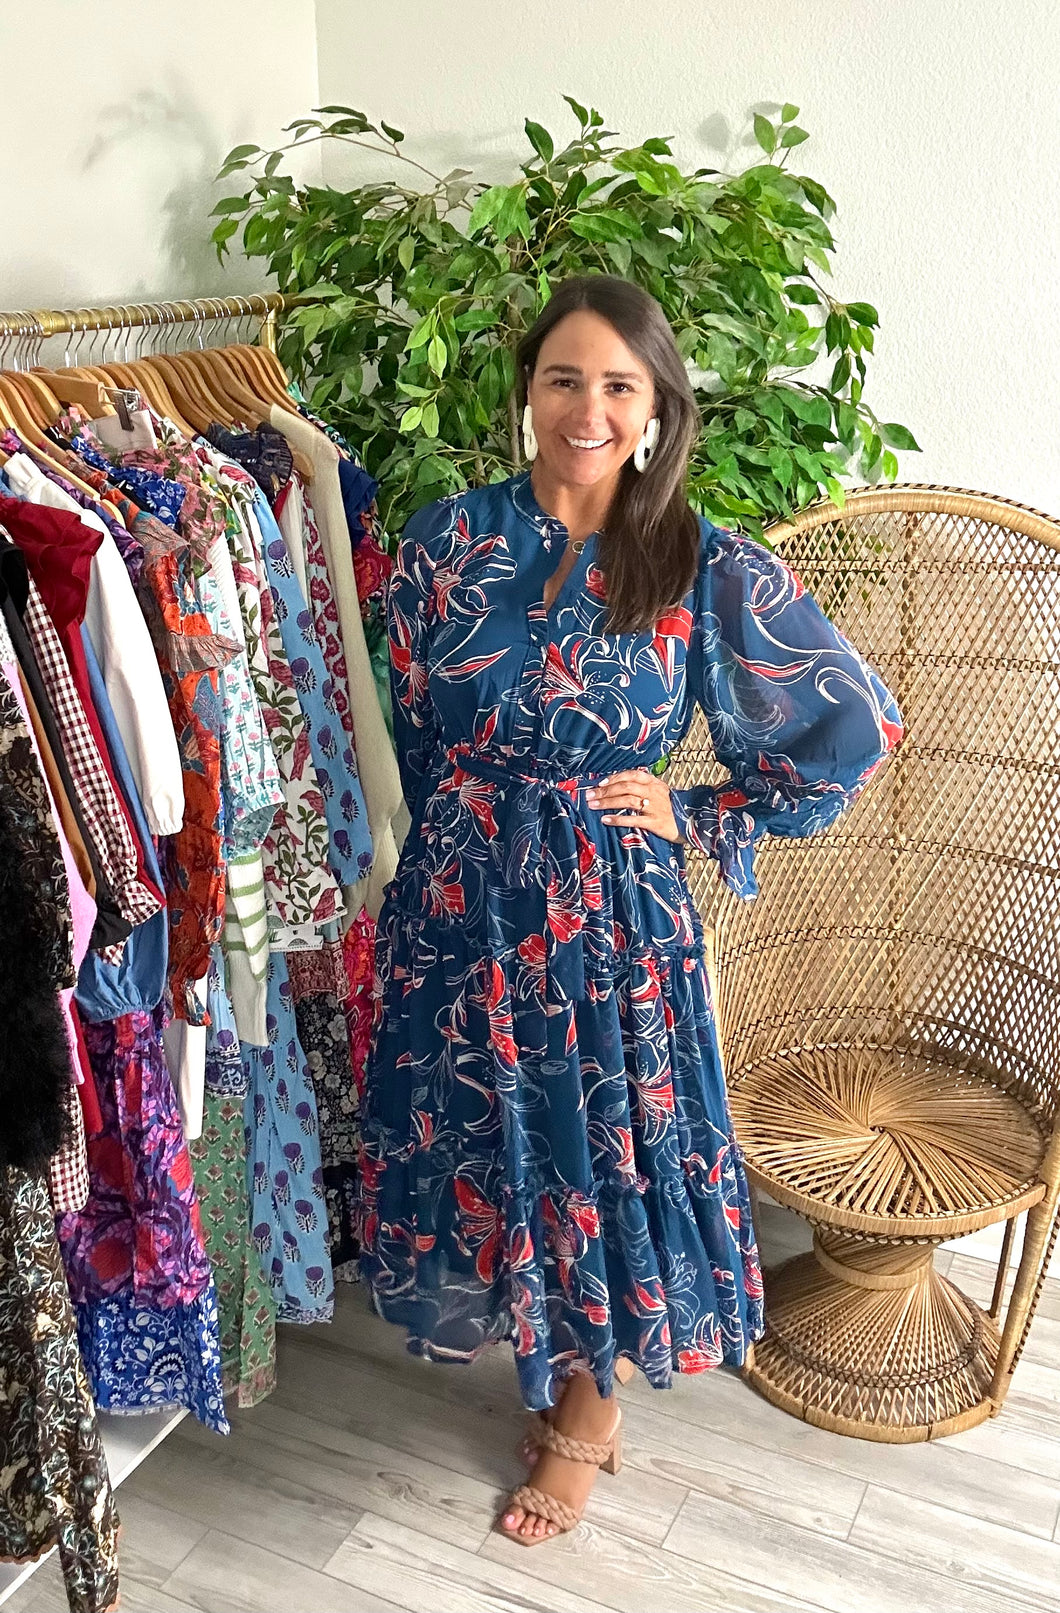 Teal and coral floral printed midi dress. Chiffon overlay with front functional buttons, tiered skirt with ruffle detailing and removable tie at waist. Button and ruffle detailing at wrist. Chiffon overlay and poly cotton blend underlay.  True to size, fits roomy, wearing size small.  Good for bump, post bump or no bump!